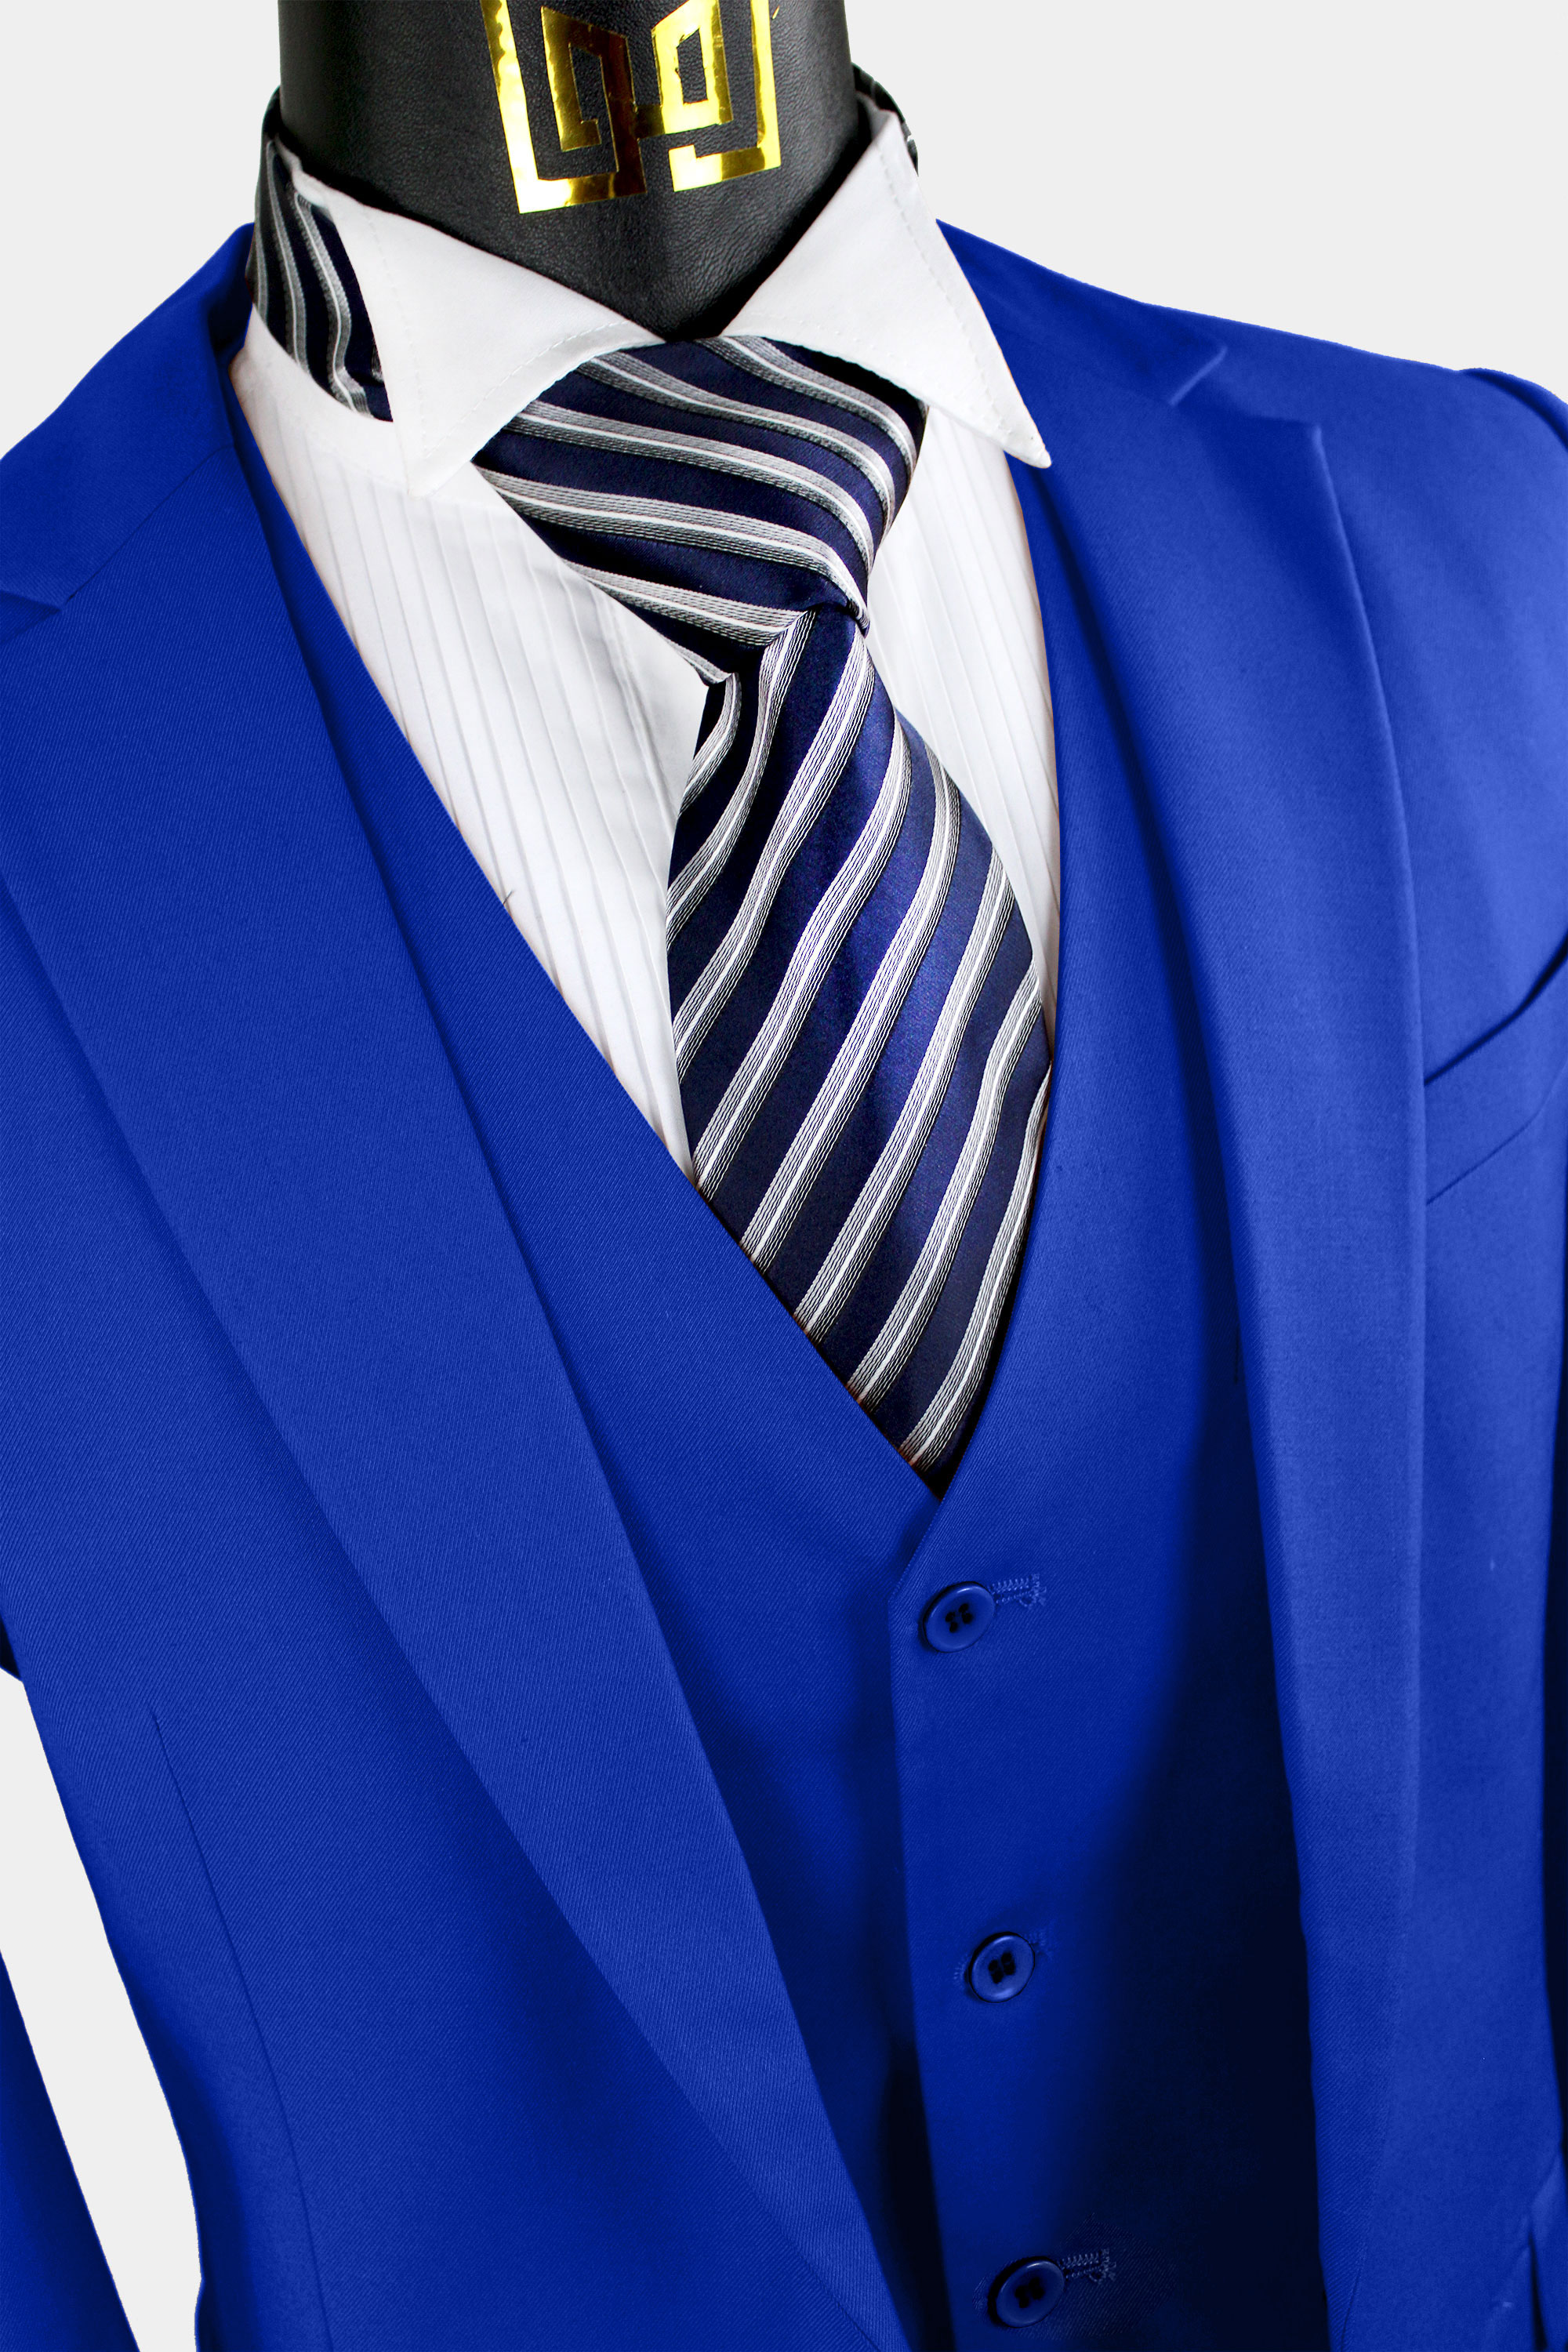 Mens Suits Regular Fit 2 Piece Royal Blue Suit Prom Homecoming